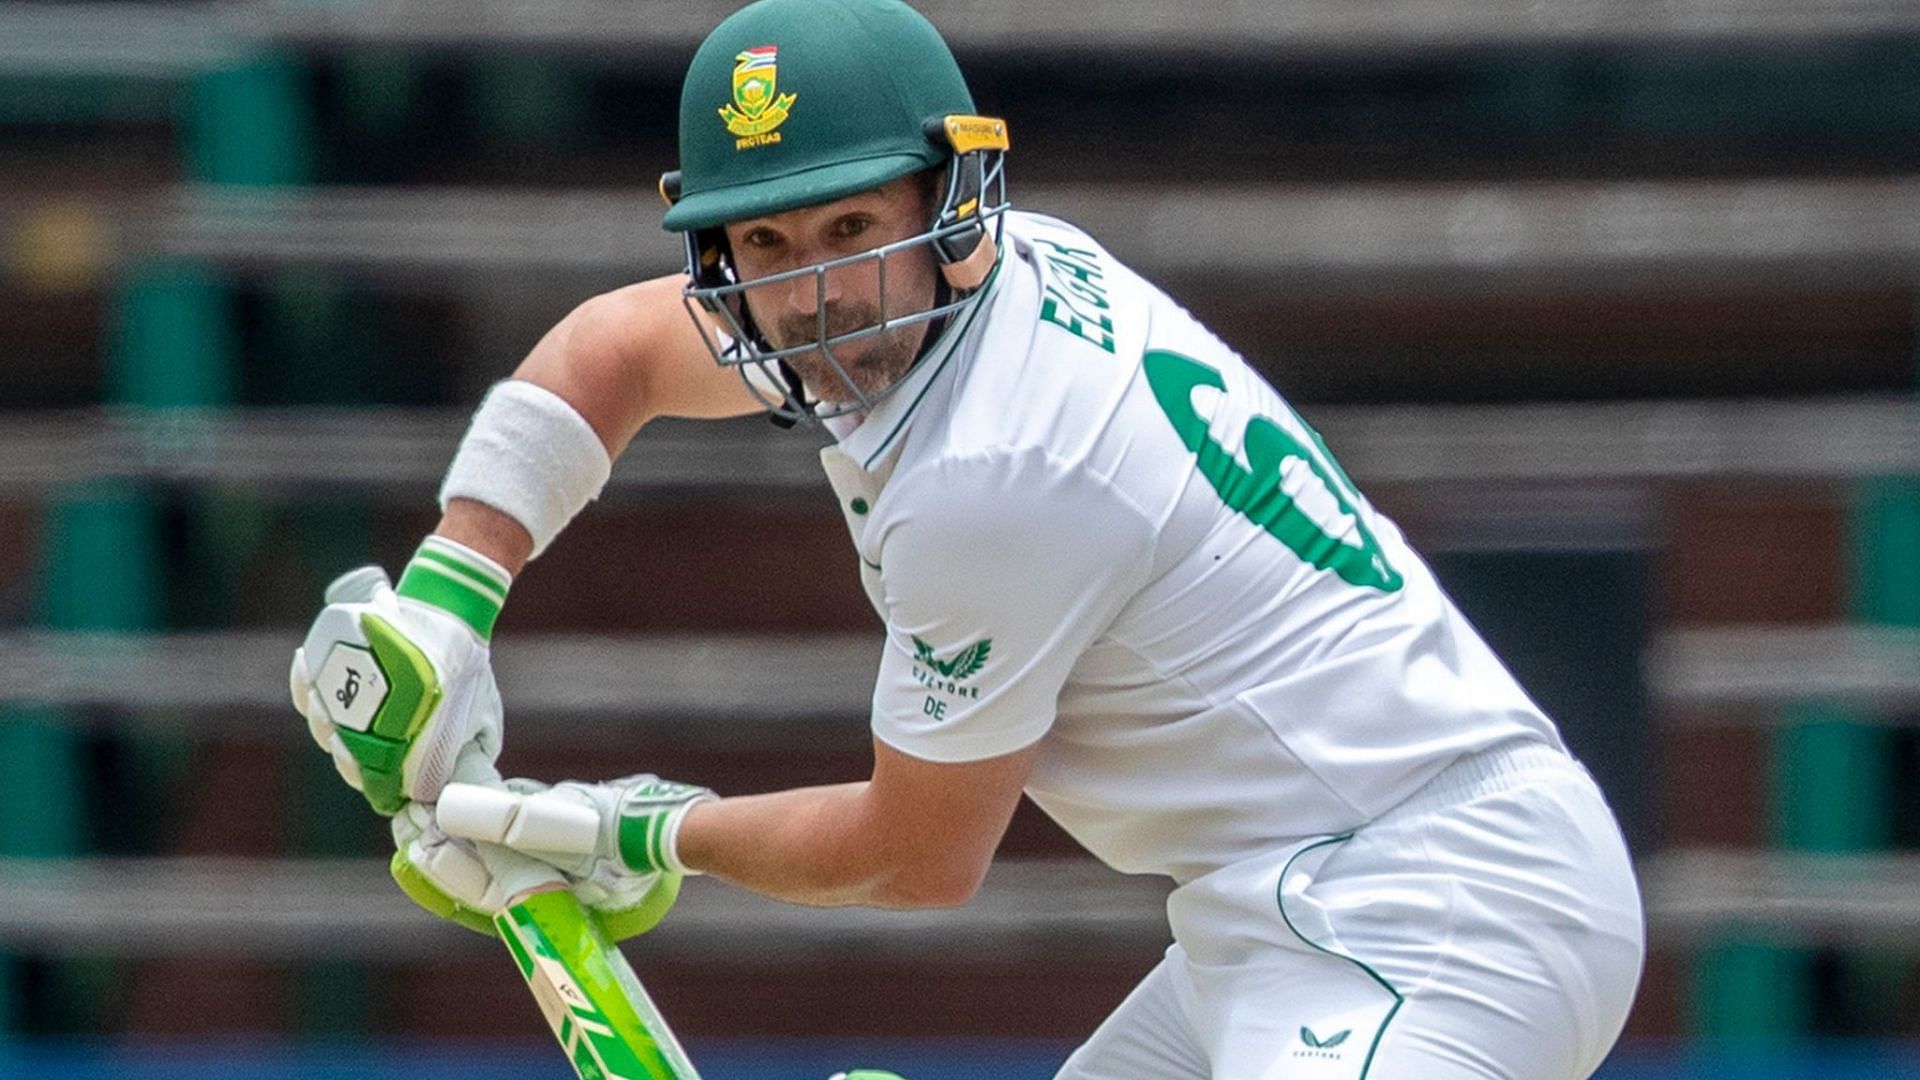 South Africa has found a very able leader in Dean Elgar